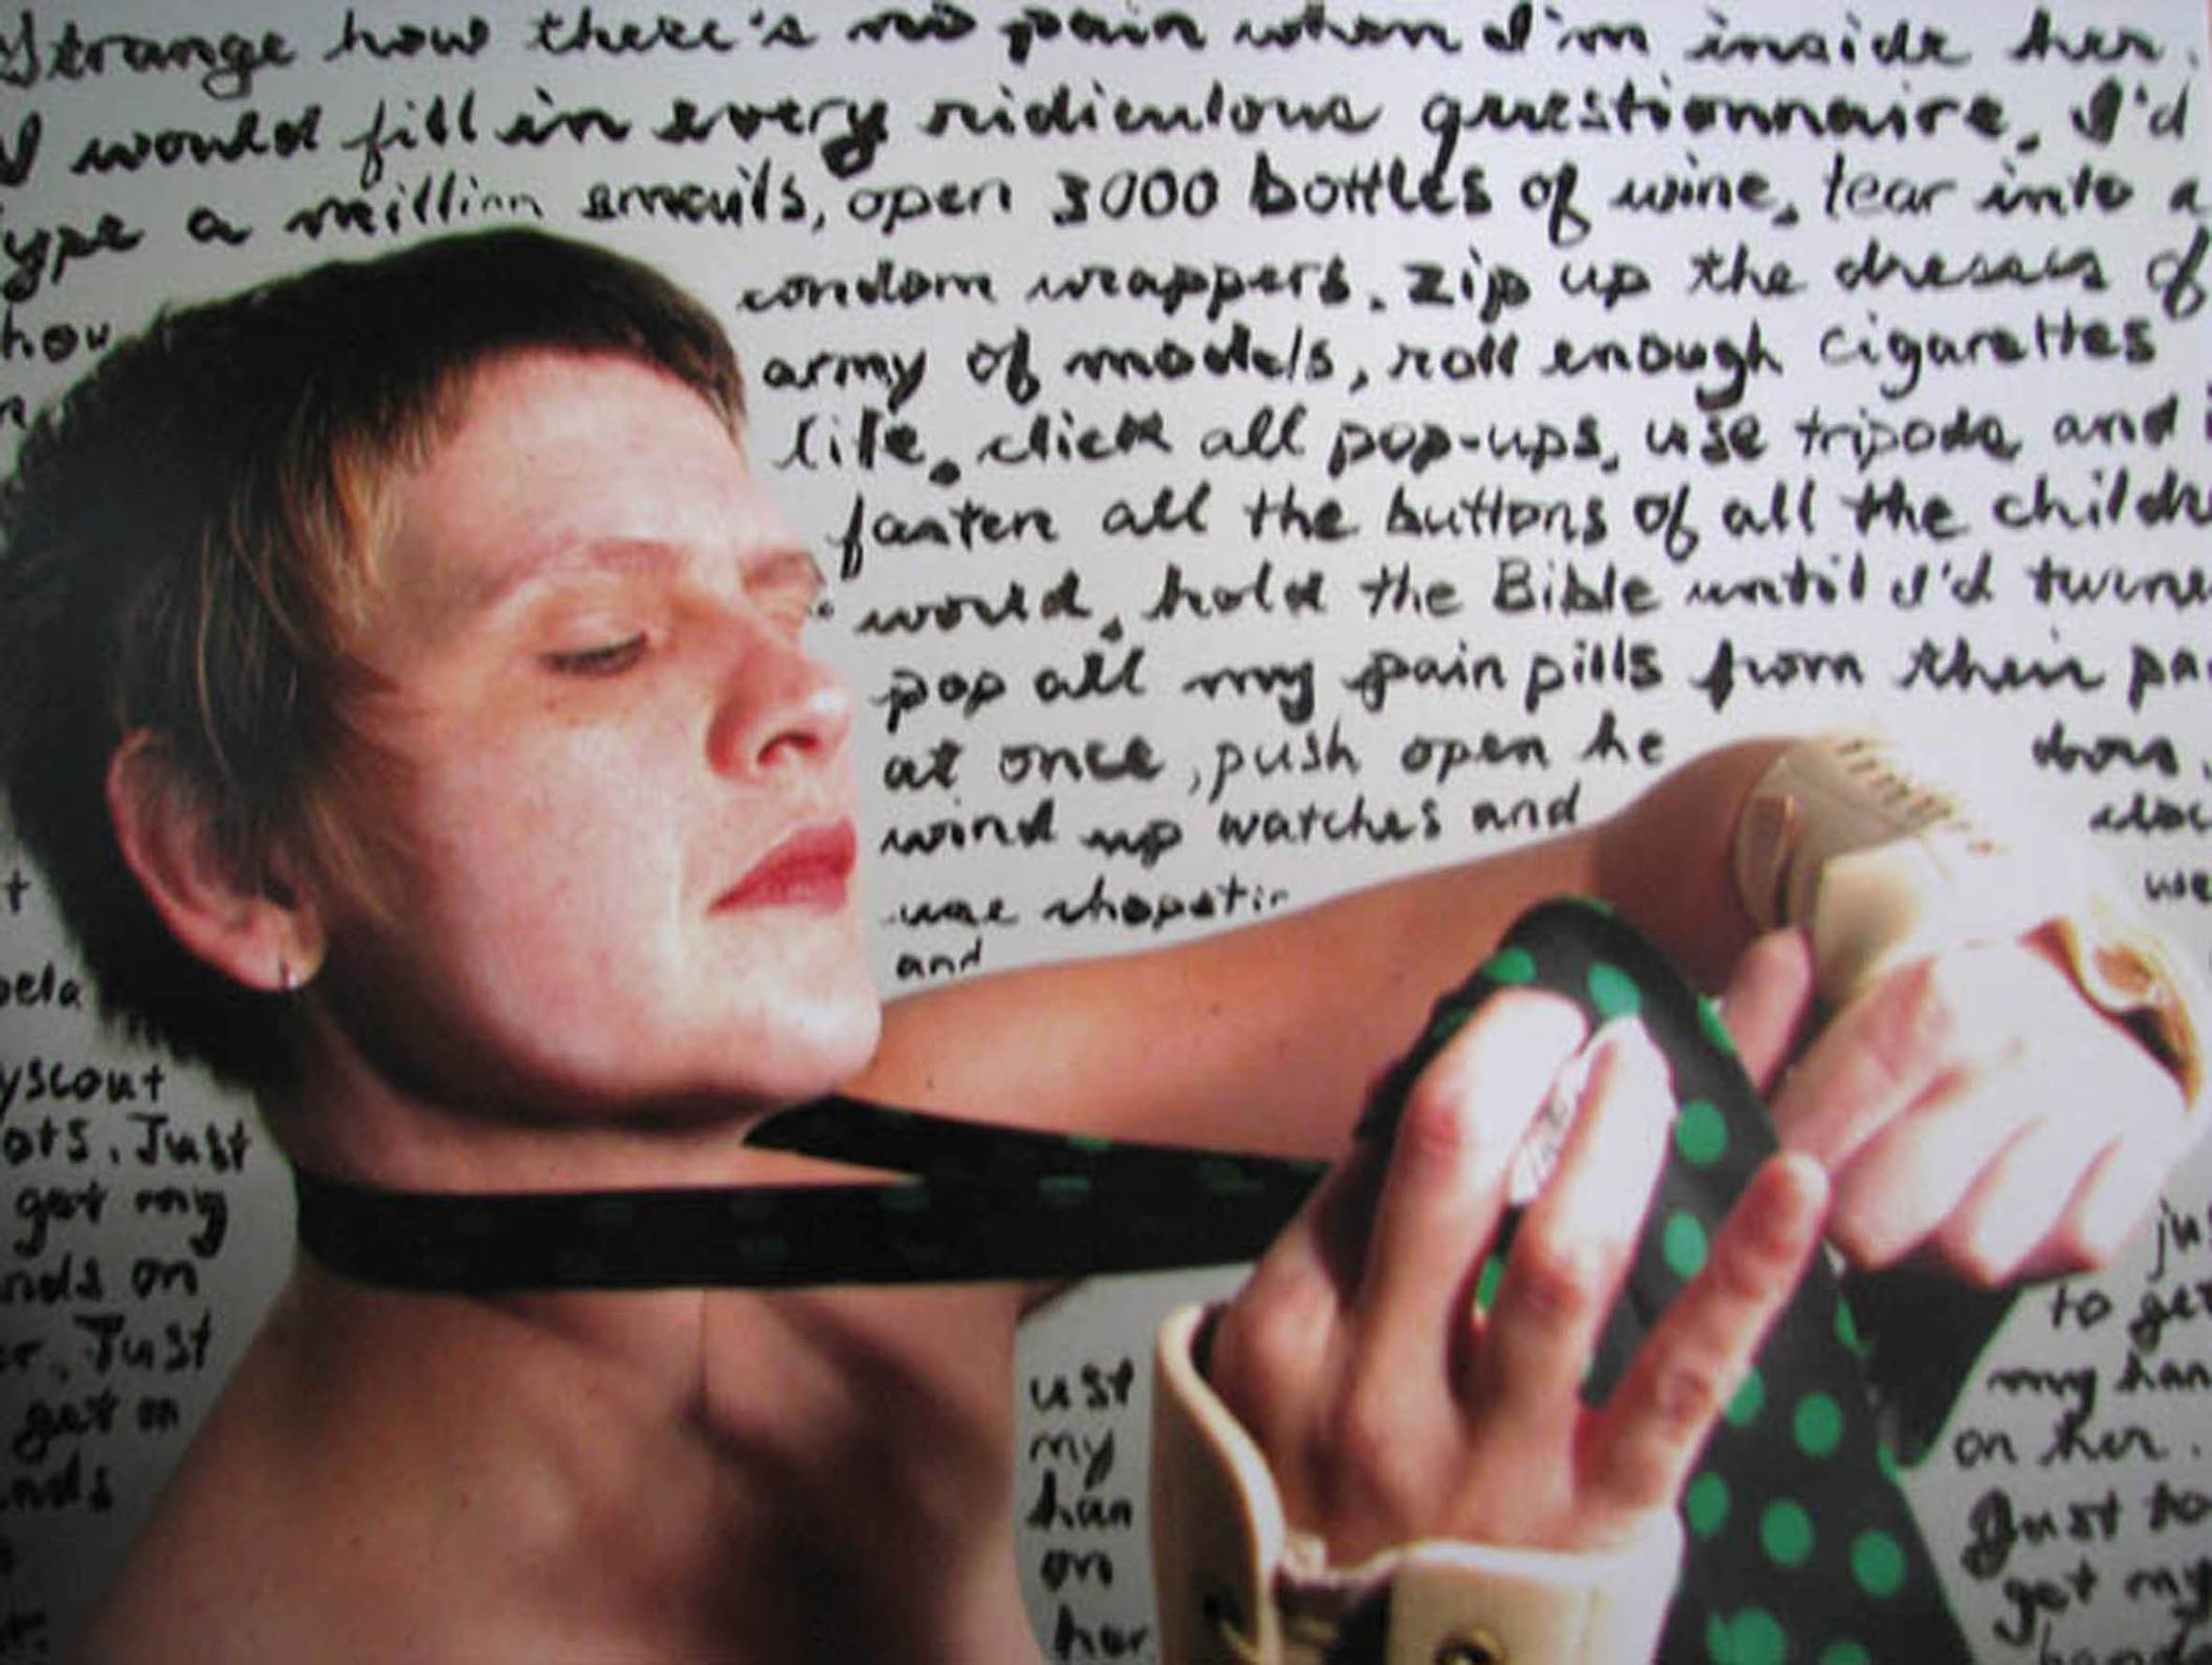 A photograph of multi-disciplinary artist Sandra Alland from above their bare chest. They are white with short brown hair. San is tying a polka dot green and black tie while wearing wrist supports. San sits or stands against a backdrop of handwritten words that are somewhat cut off. Some of the words include: Strange how there's no pain when I'm inside her. I would fill in every ridiculous questionnaire, I'd type a million emails, open 300 bottles of wine, tear into a... condom wrappers, zip up the dresses of... army of models, roll enough cigarettes... life, click all pop-ups, use tripods and... fasten all the buttons of all the chidren... world, hold the Bilbe until I'd turn... pop all my pain pill sfrom their...